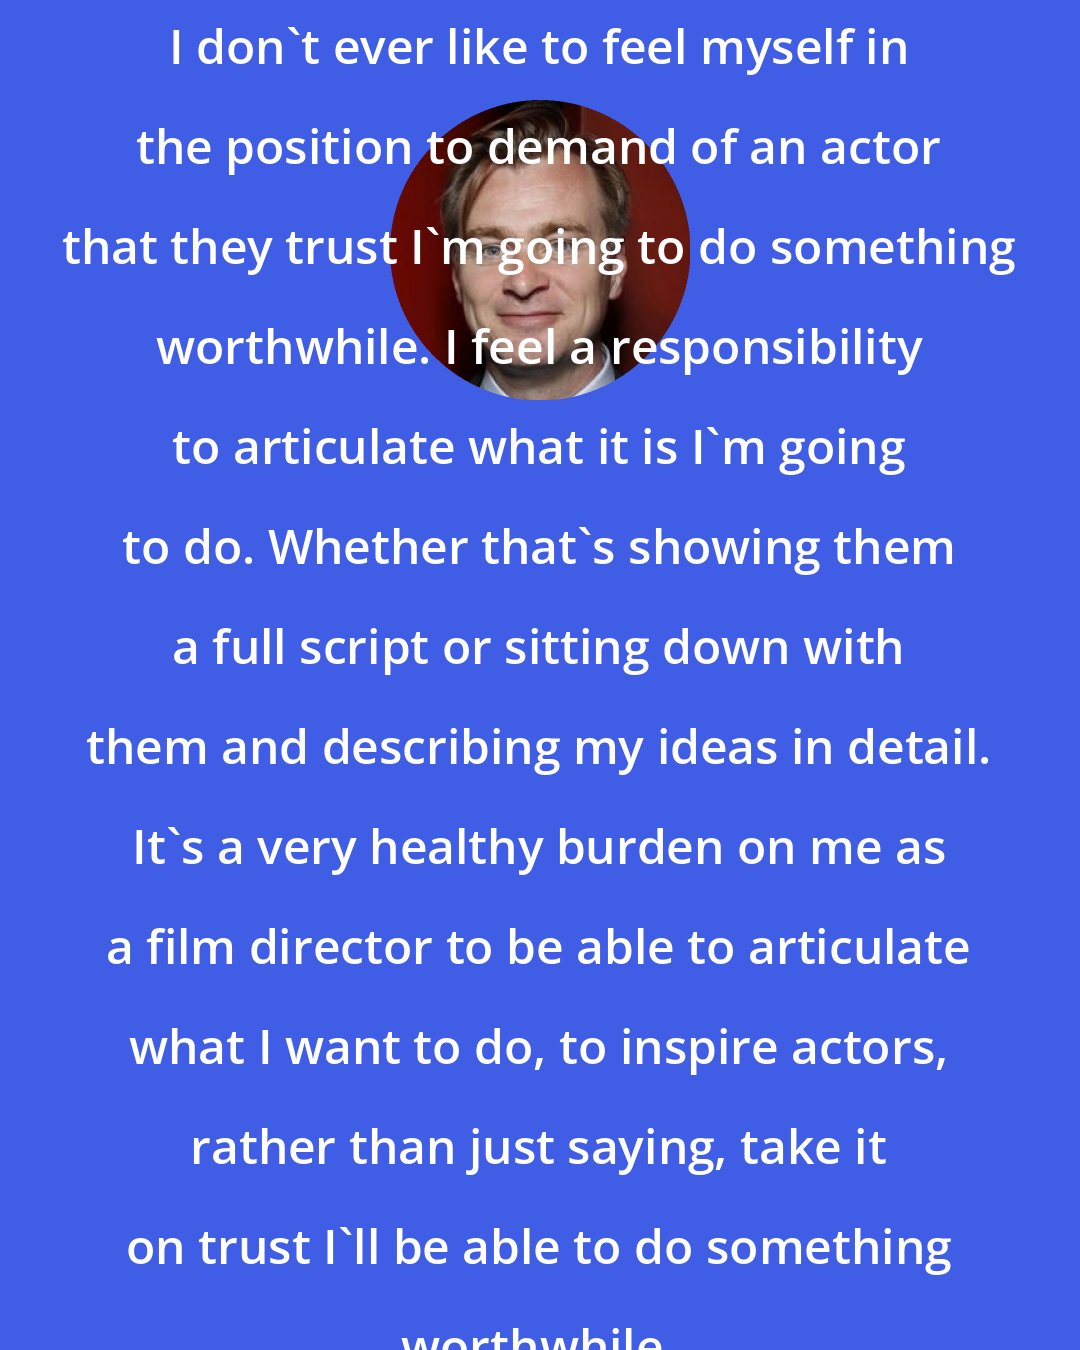 Christopher Nolan: I don't ever like to feel myself in the position to demand of an actor that they trust I'm going to do something worthwhile. I feel a responsibility to articulate what it is I'm going to do. Whether that's showing them a full script or sitting down with them and describing my ideas in detail. It's a very healthy burden on me as a film director to be able to articulate what I want to do, to inspire actors, rather than just saying, take it on trust I'll be able to do something worthwhile.